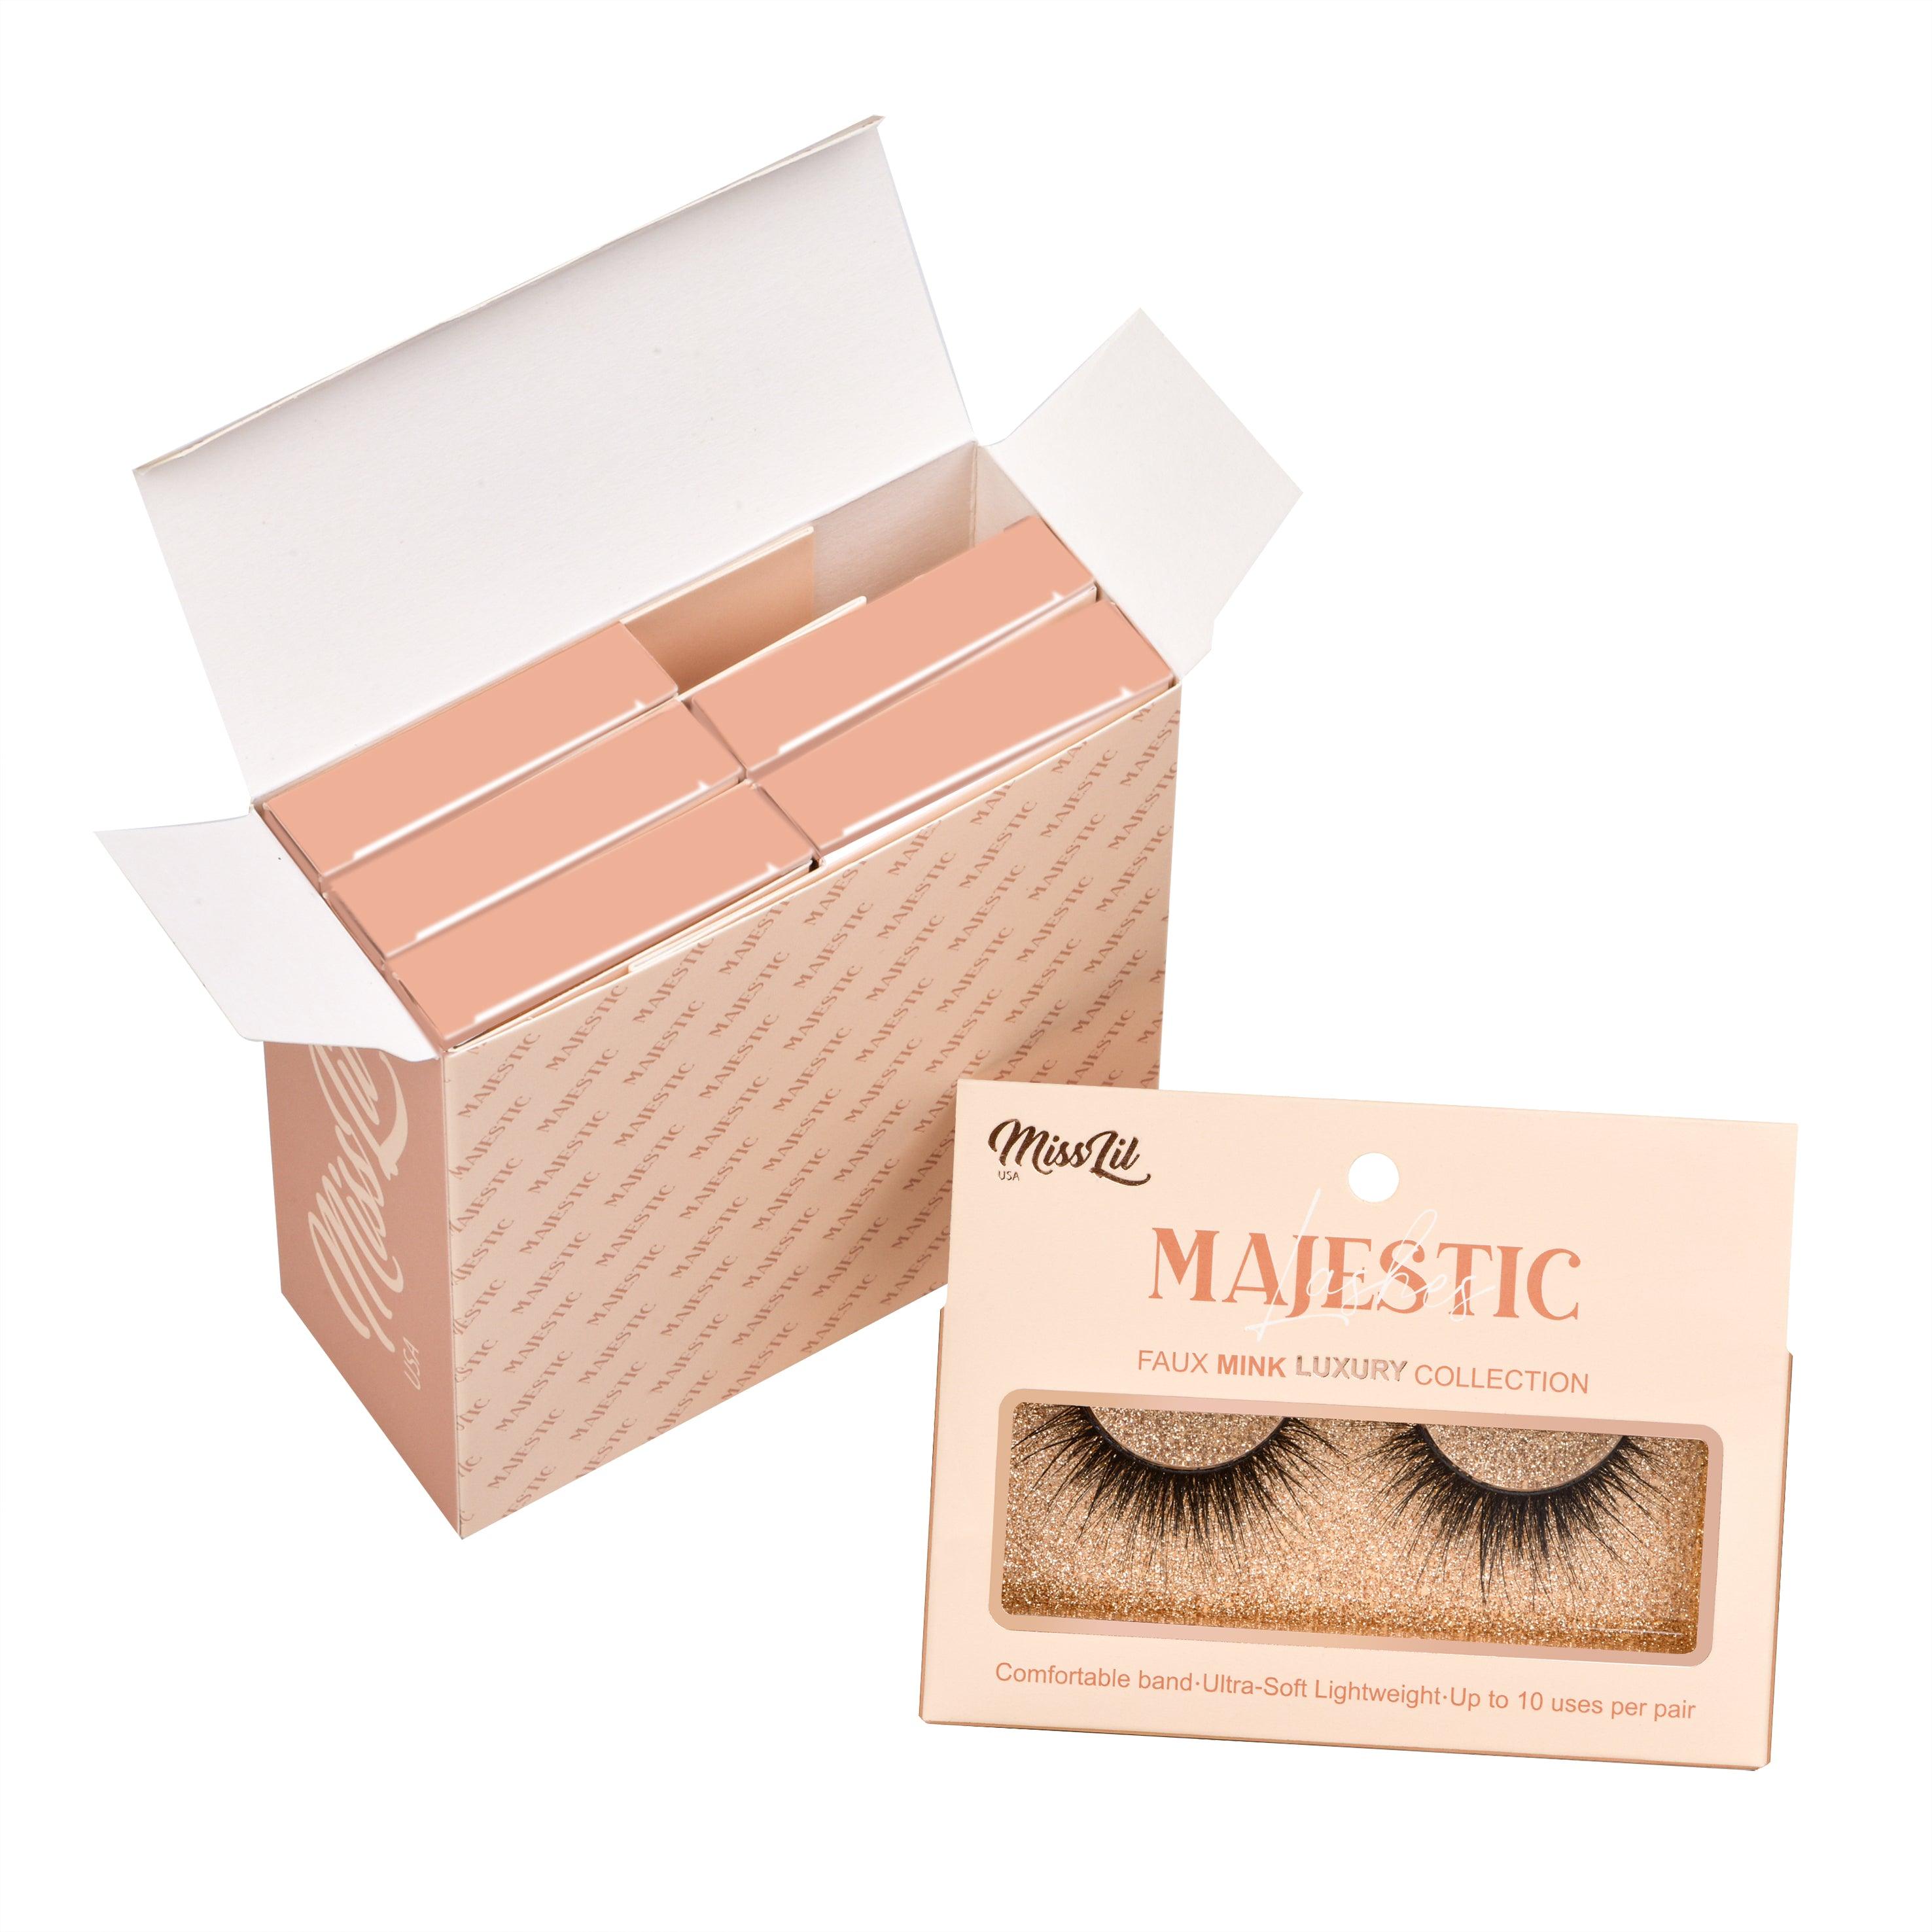 1-PAIR LASHES-MAJESTIC COLLECTION #27 (PACK OF 3) - Miss Lil USA